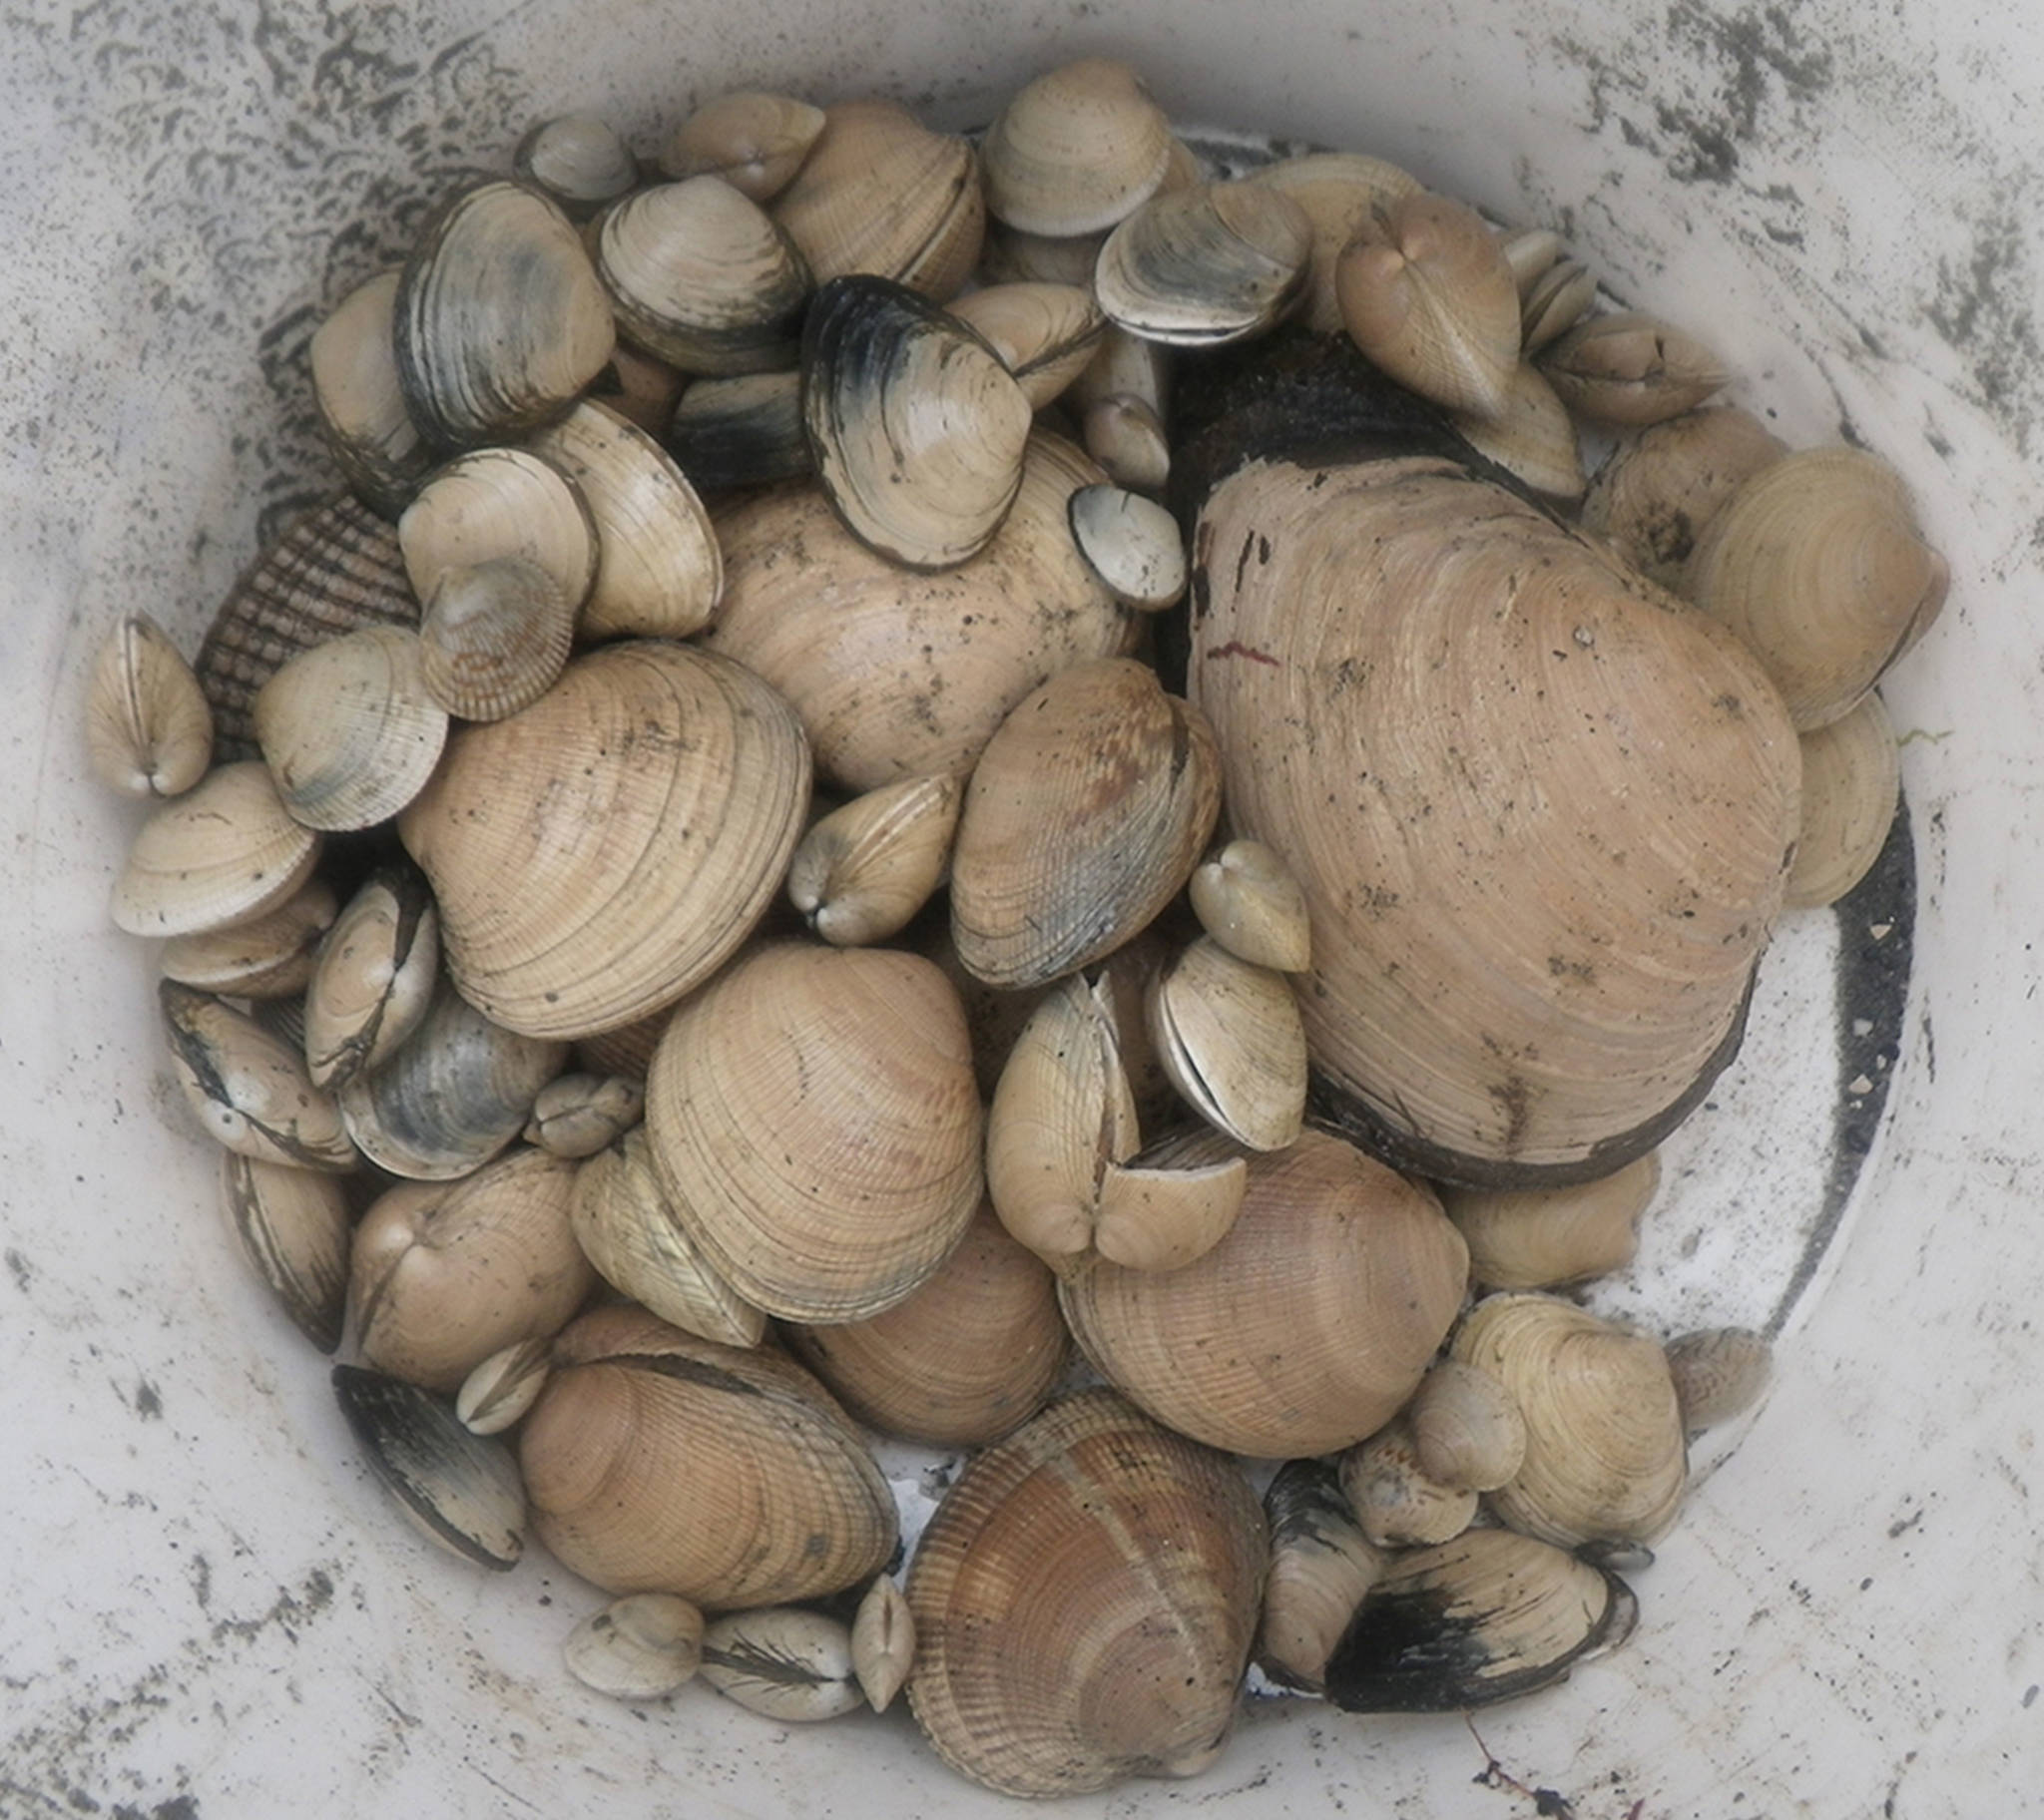 Soapy clams raise concerns for island ecosystems